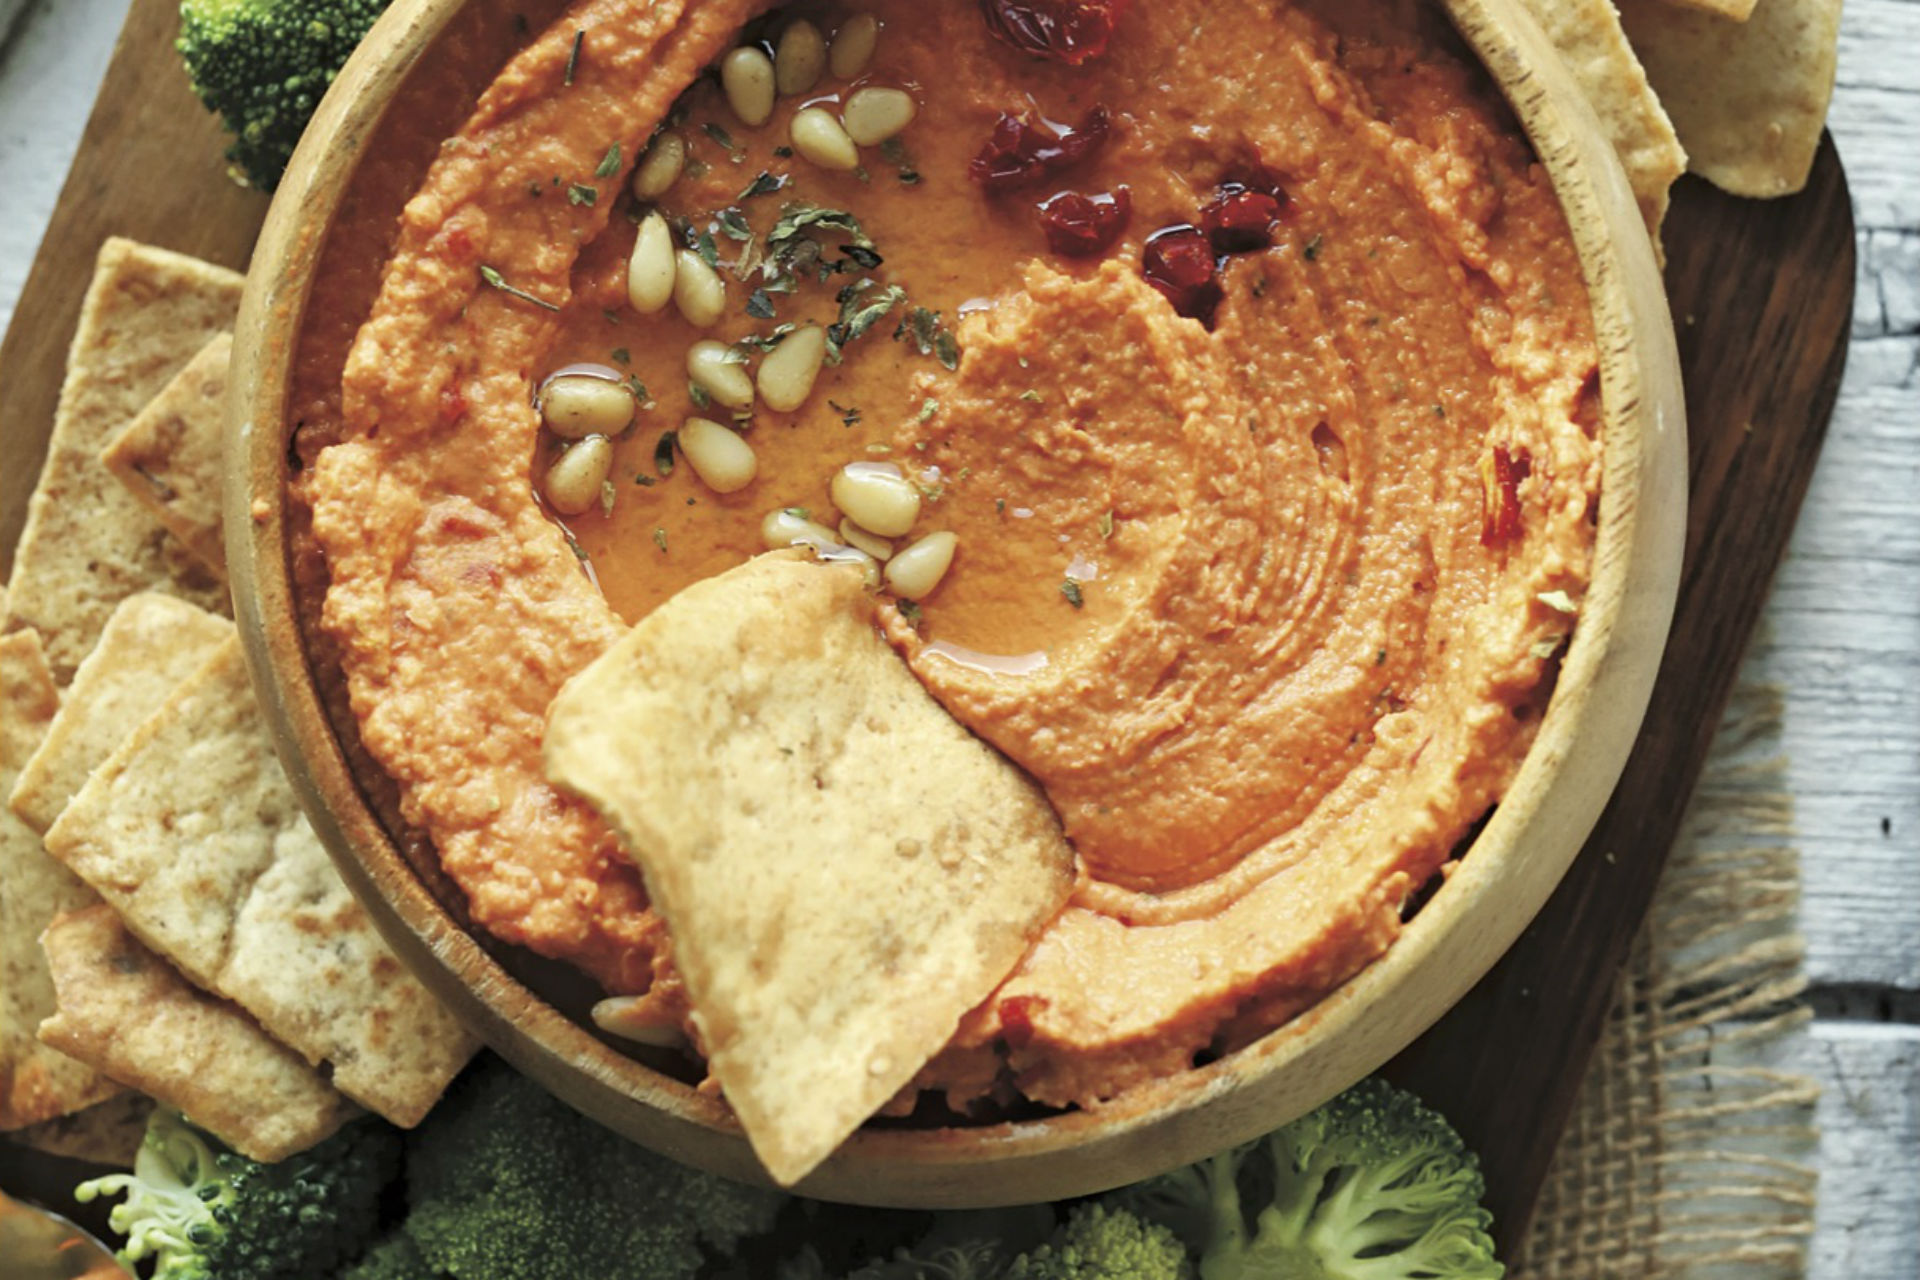 bowl of hummus with bread and veggies to dip